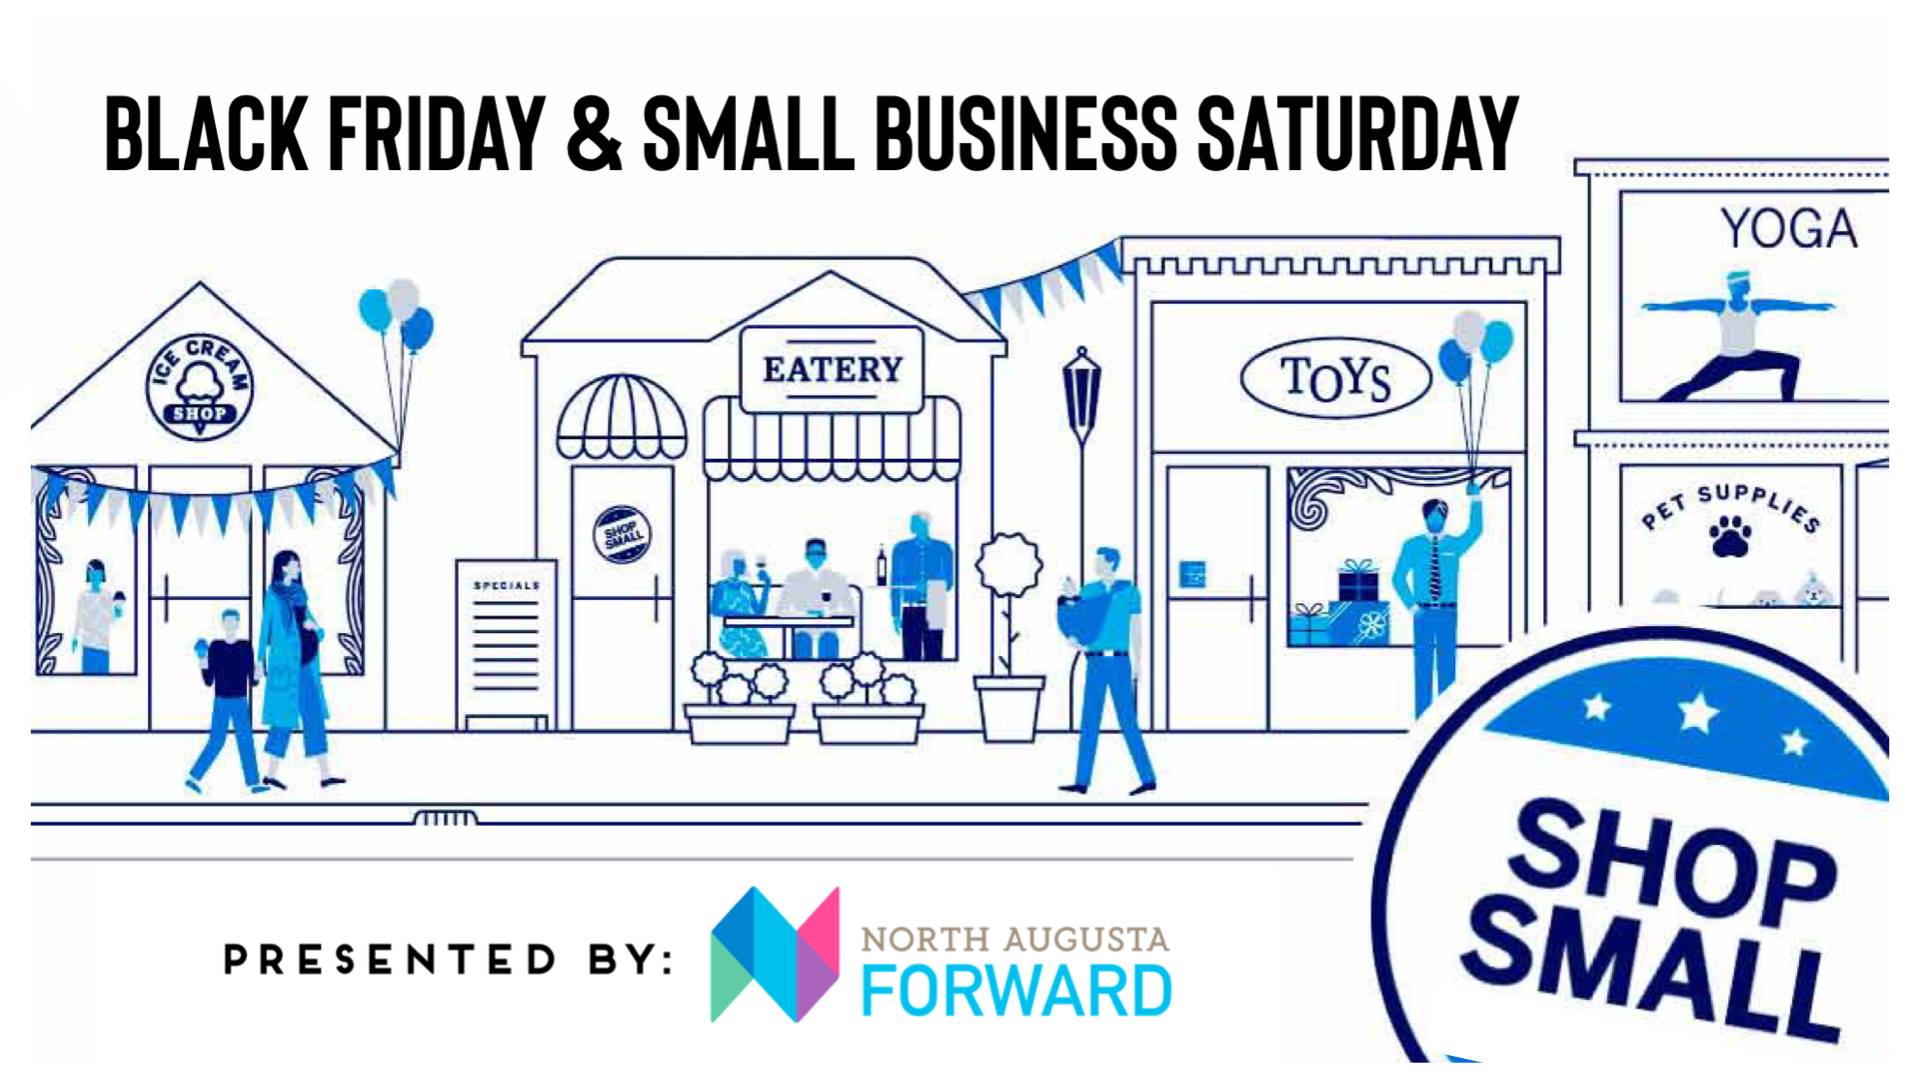 Black Friday & Small Business Saturday